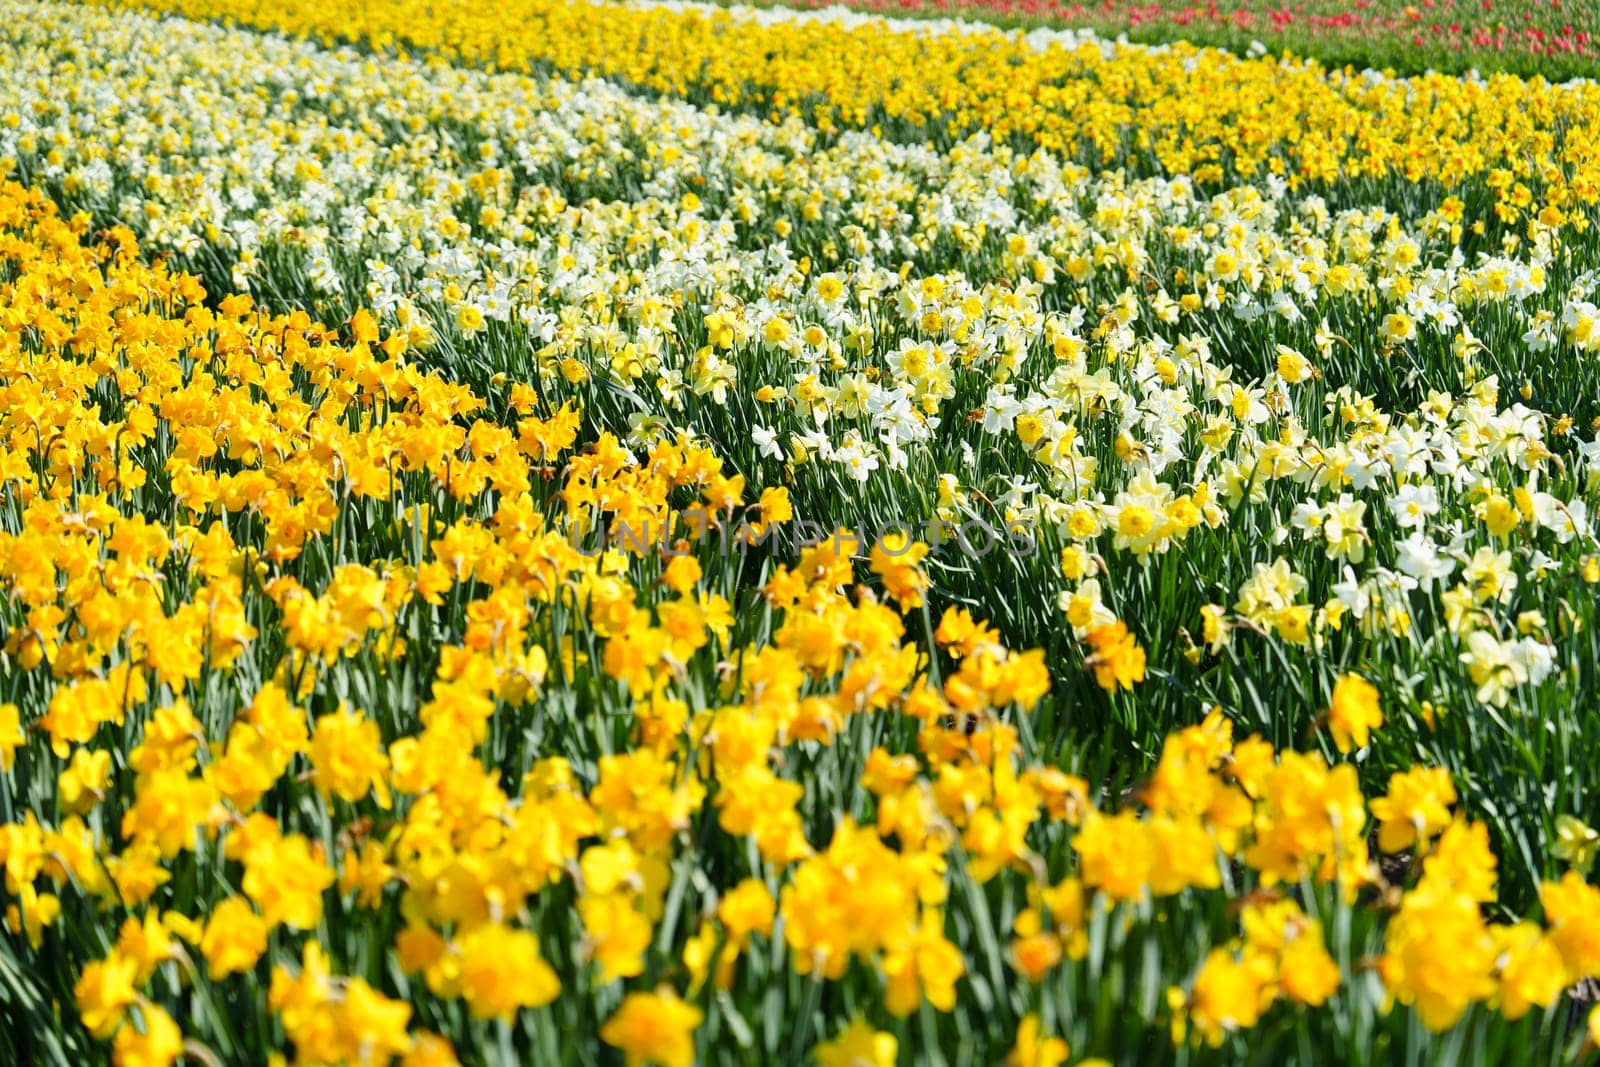 Idyllic Holland Countryside Scenery with Endless Blooming Yellow Daffodils in Spring by PhotoTime